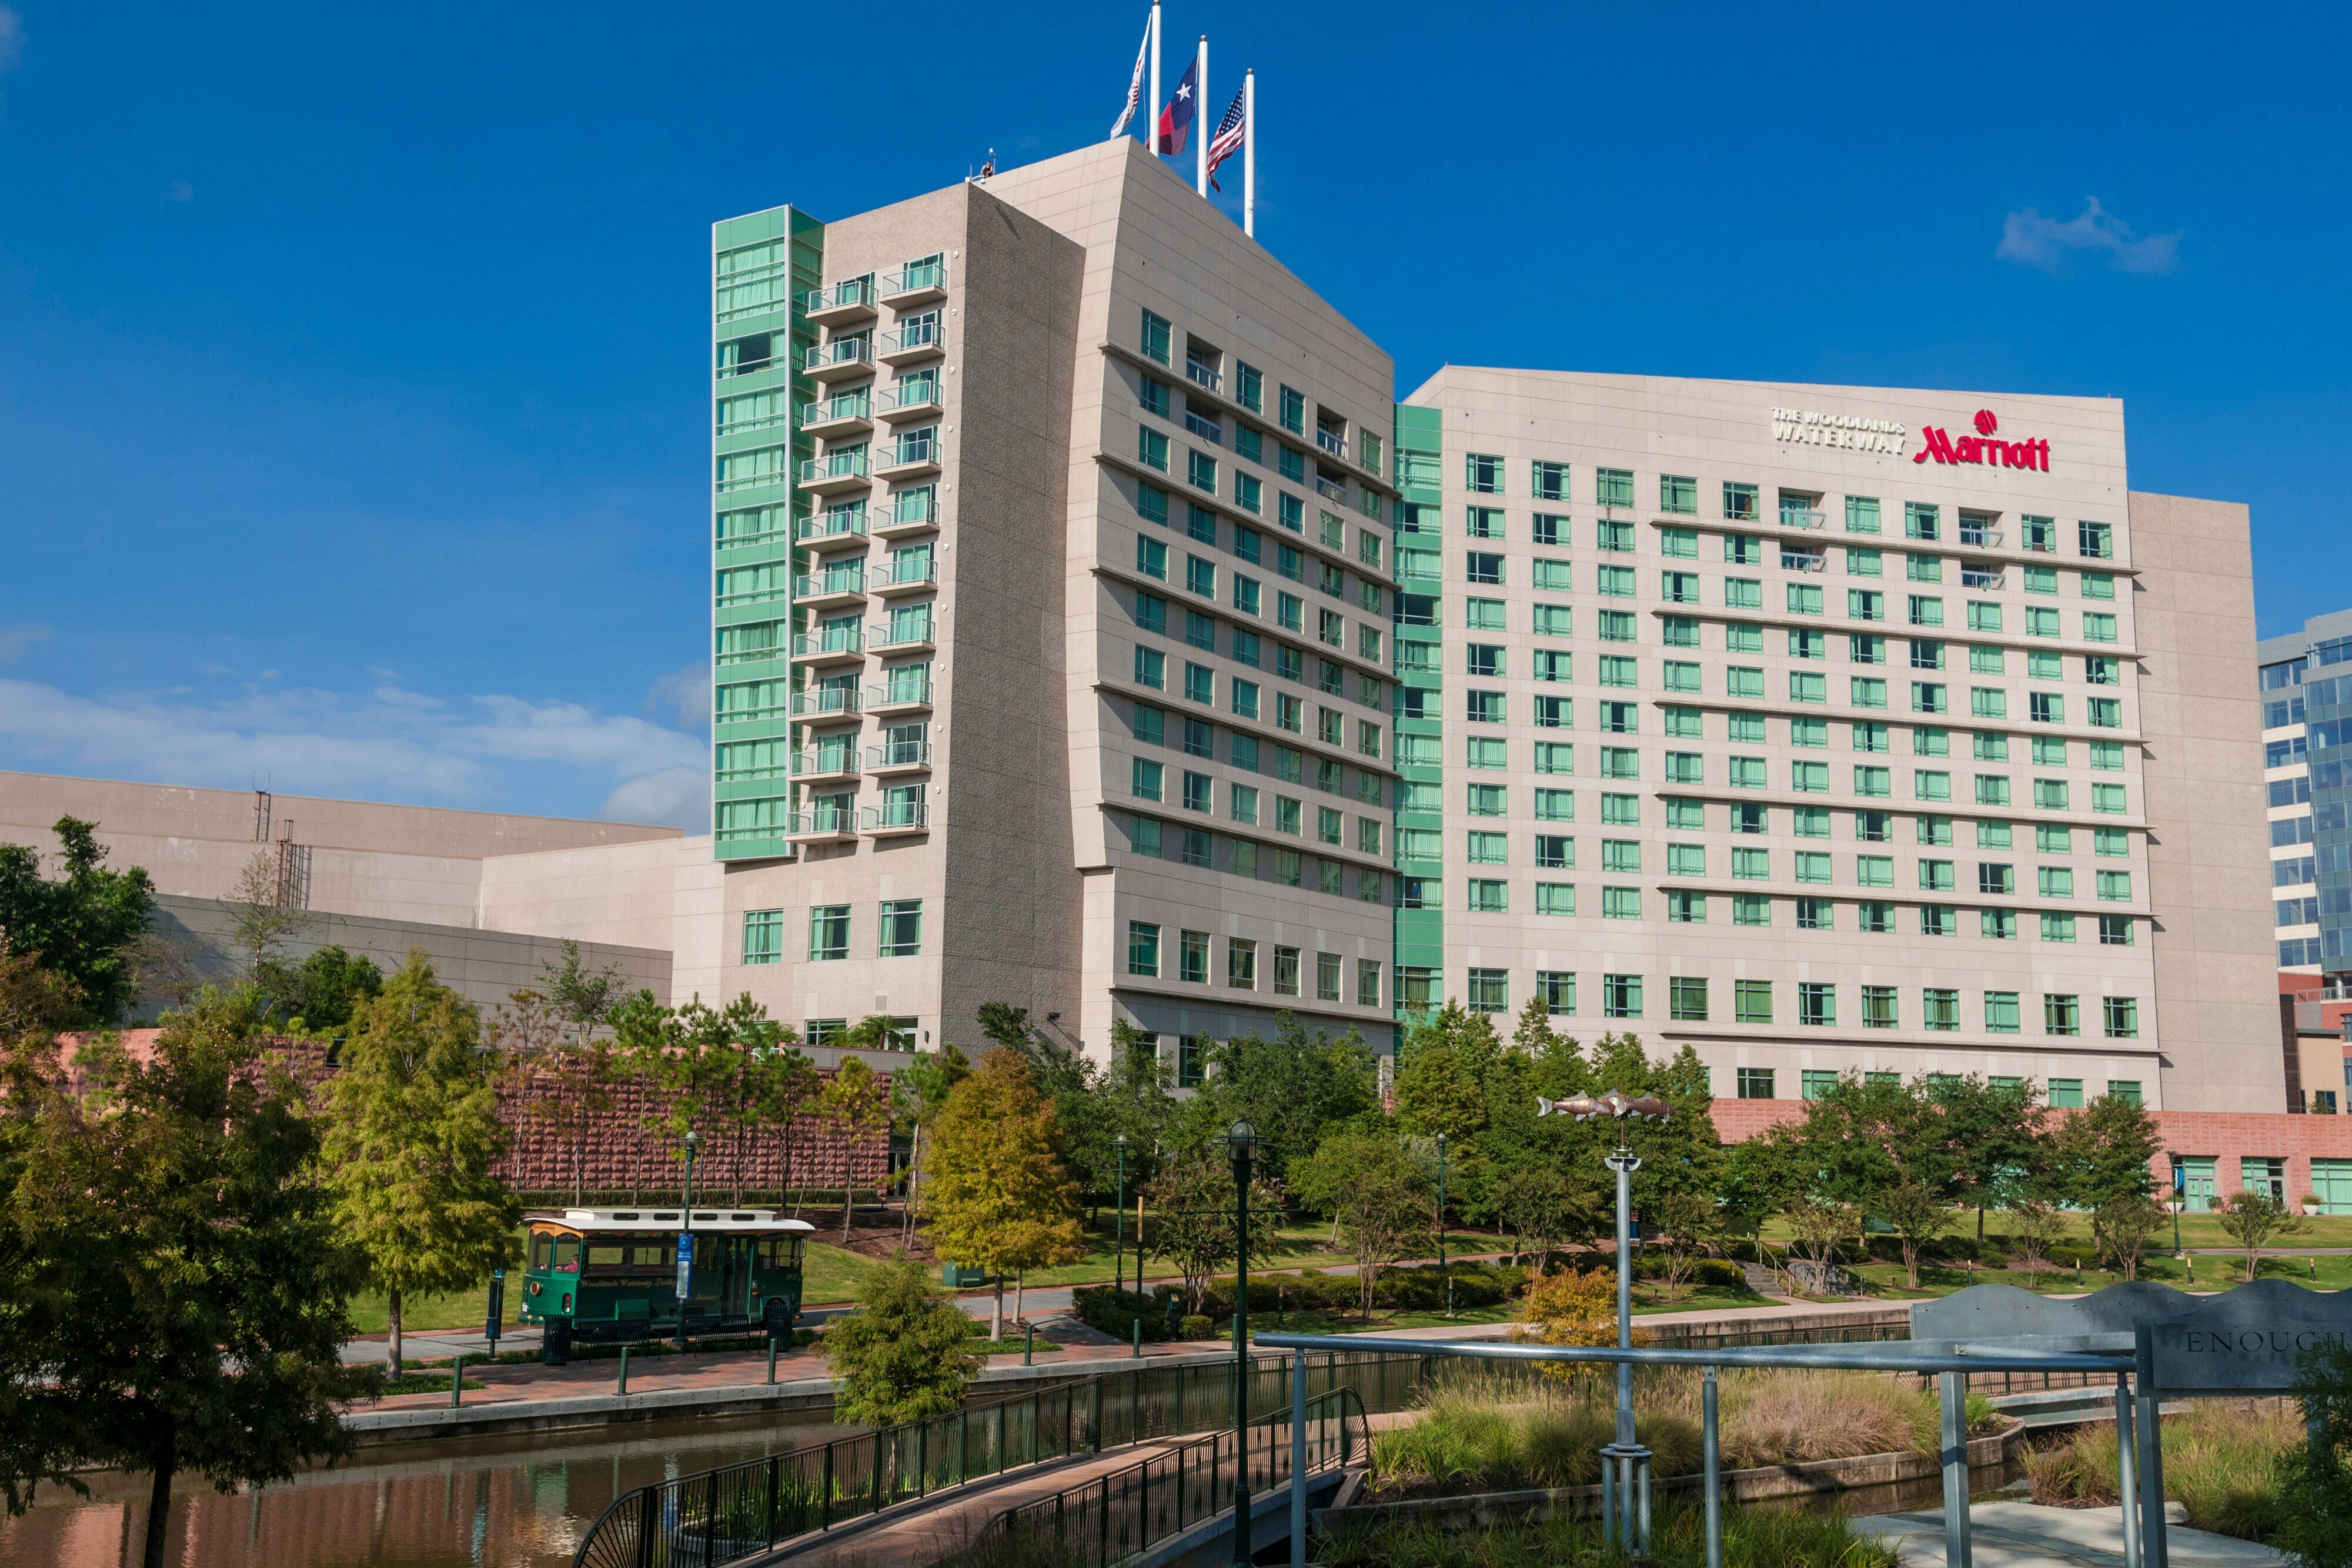 Photo of The Woodlands Waterway Marriott Hotel & Convention Center, The Woodlands, TX